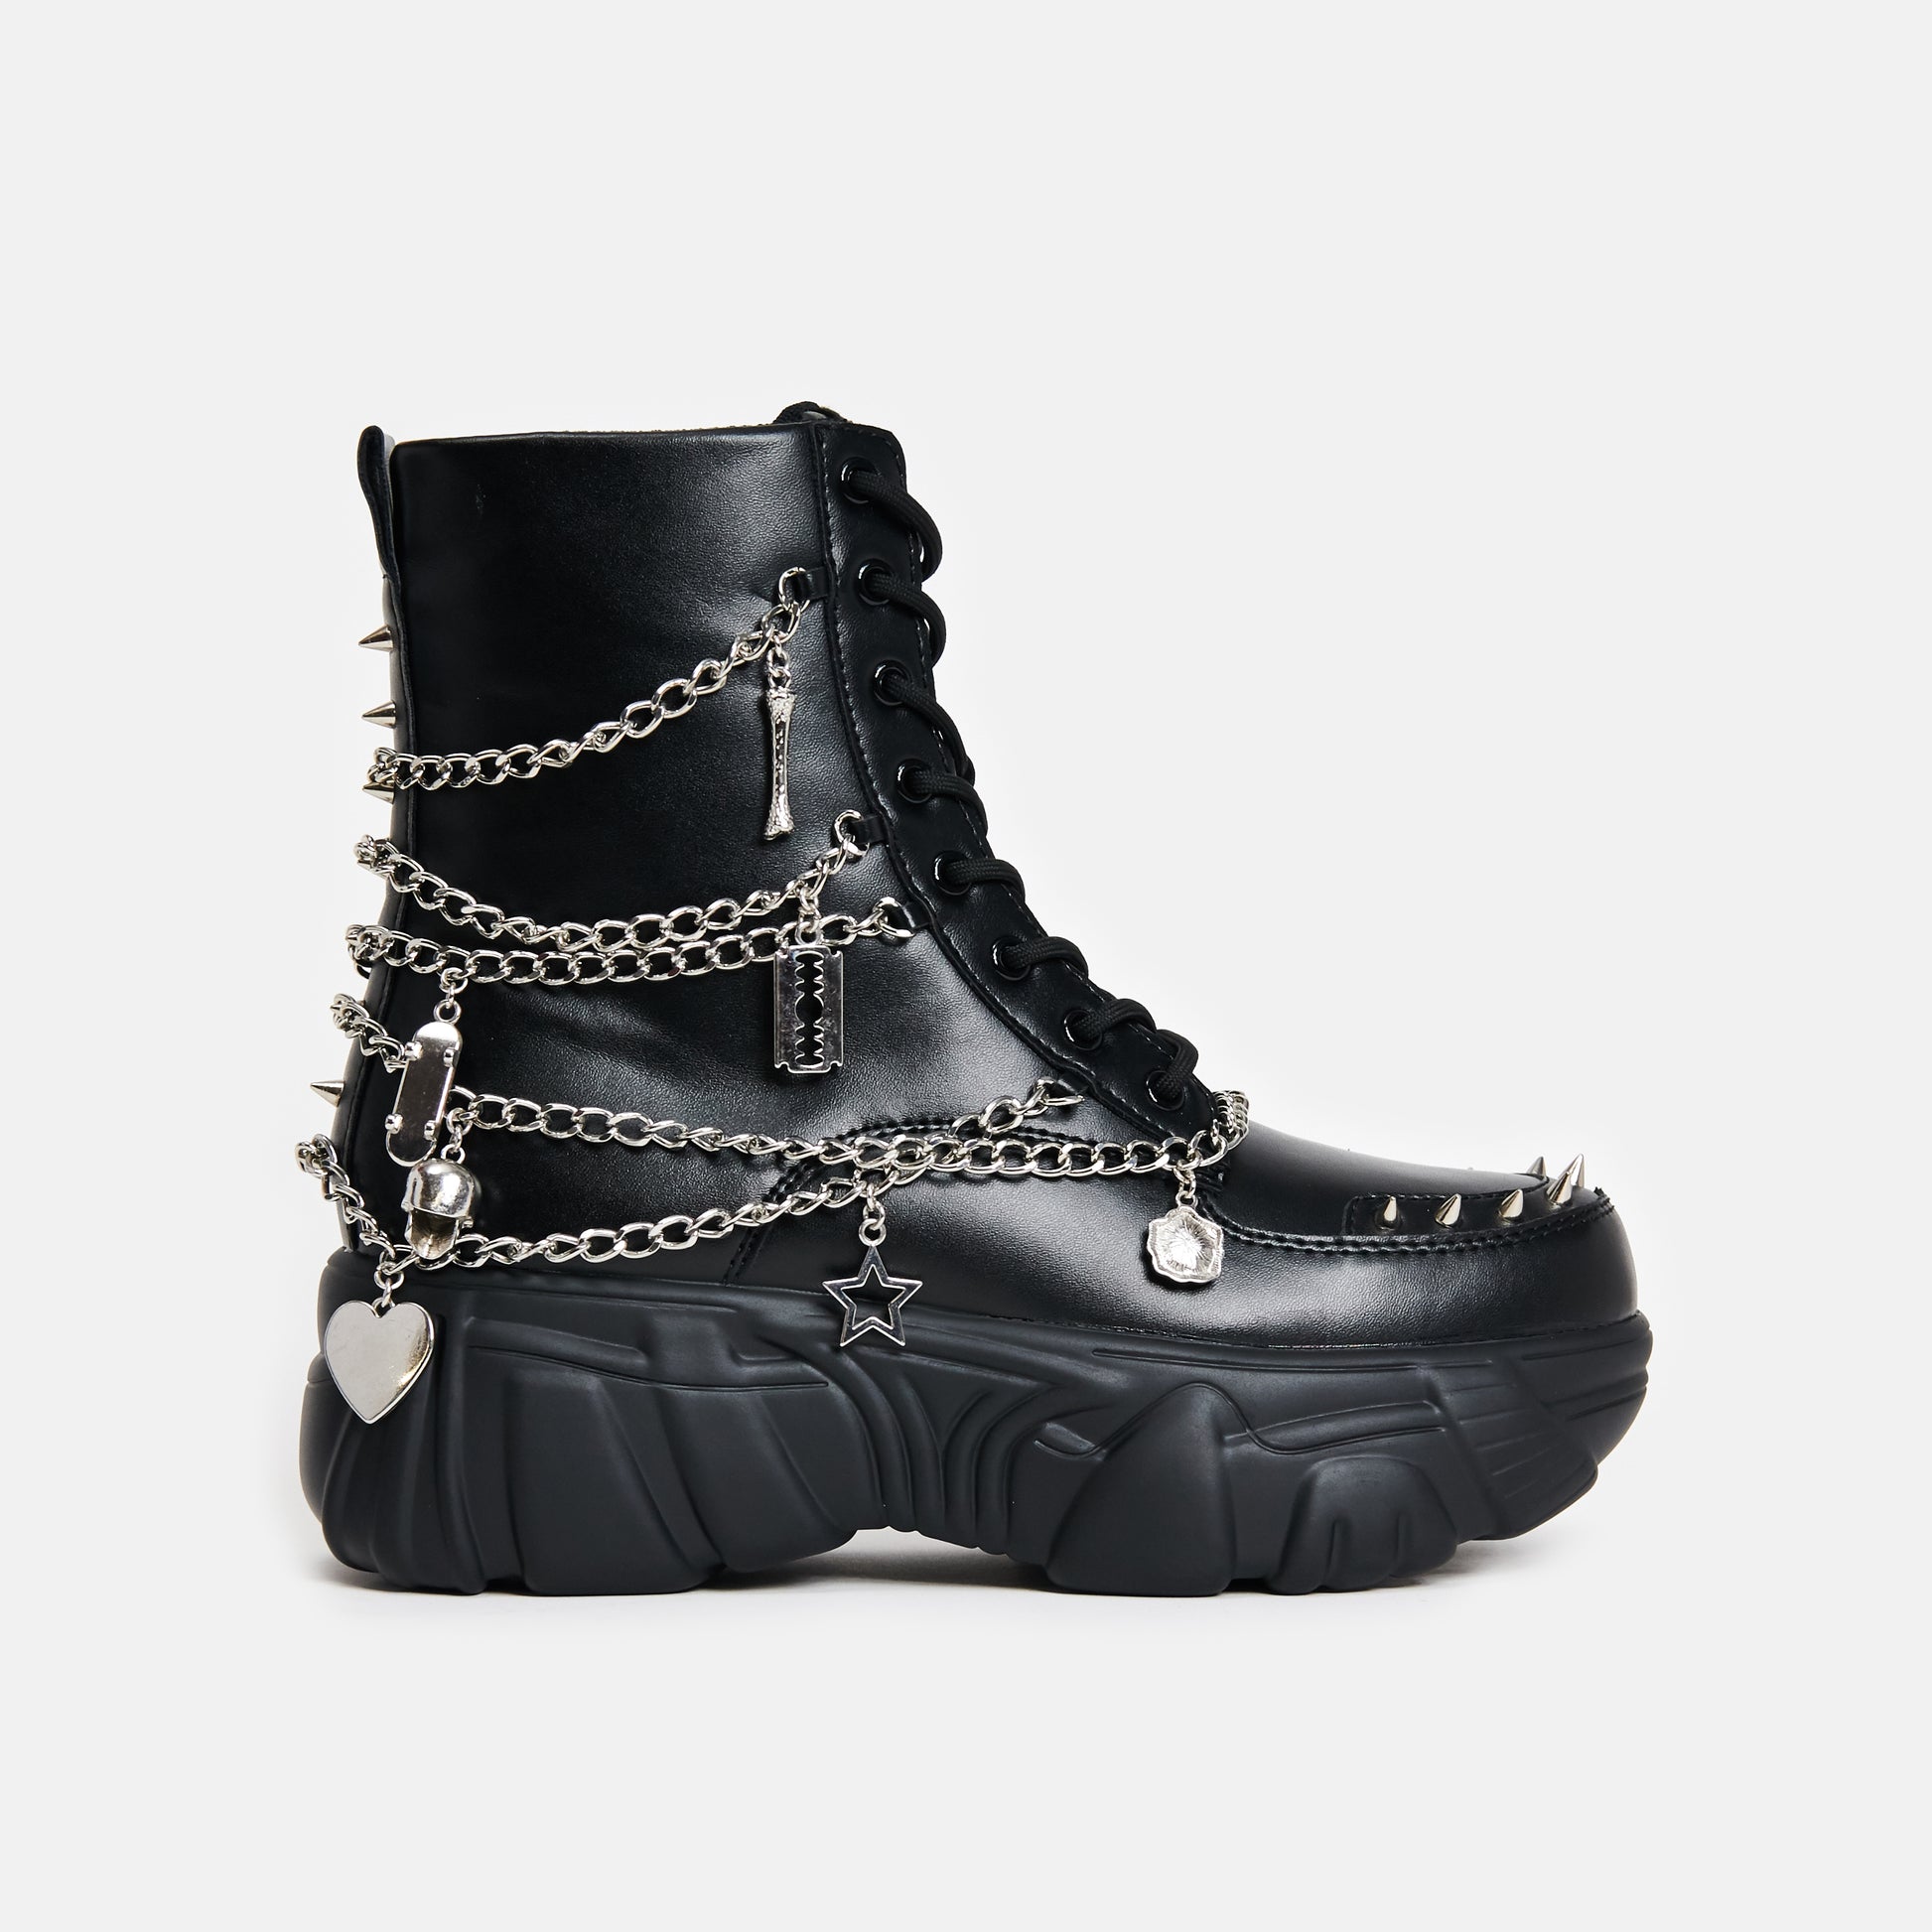 Boned Catch Black Mystic Charm Boots - Ankle Boots - KOI Footwear - Black - Side View